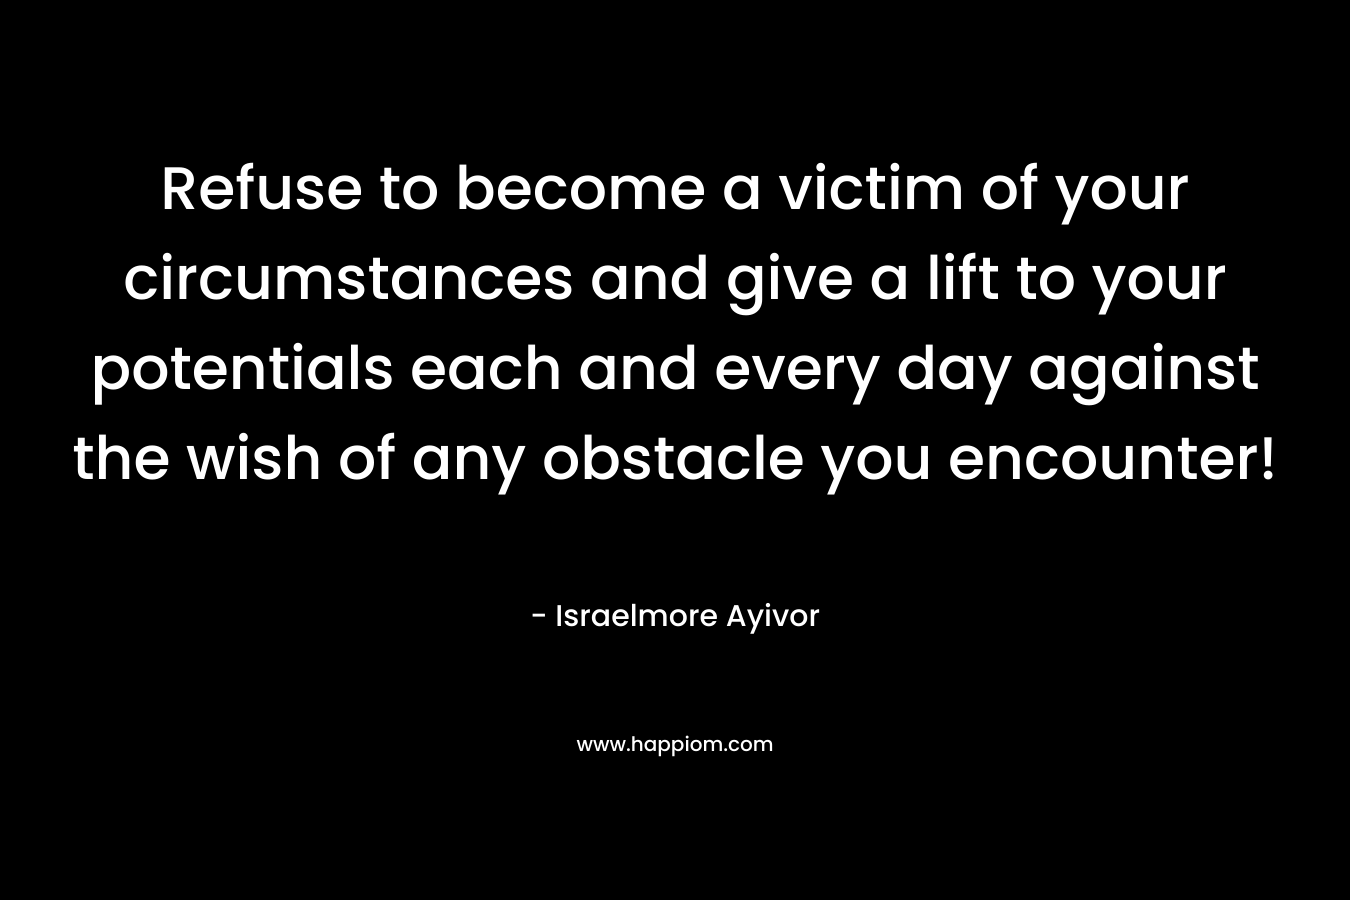 Refuse to become a victim of your circumstances and give a lift to your potentials each and every day against the wish of any obstacle you encounter! – Israelmore Ayivor